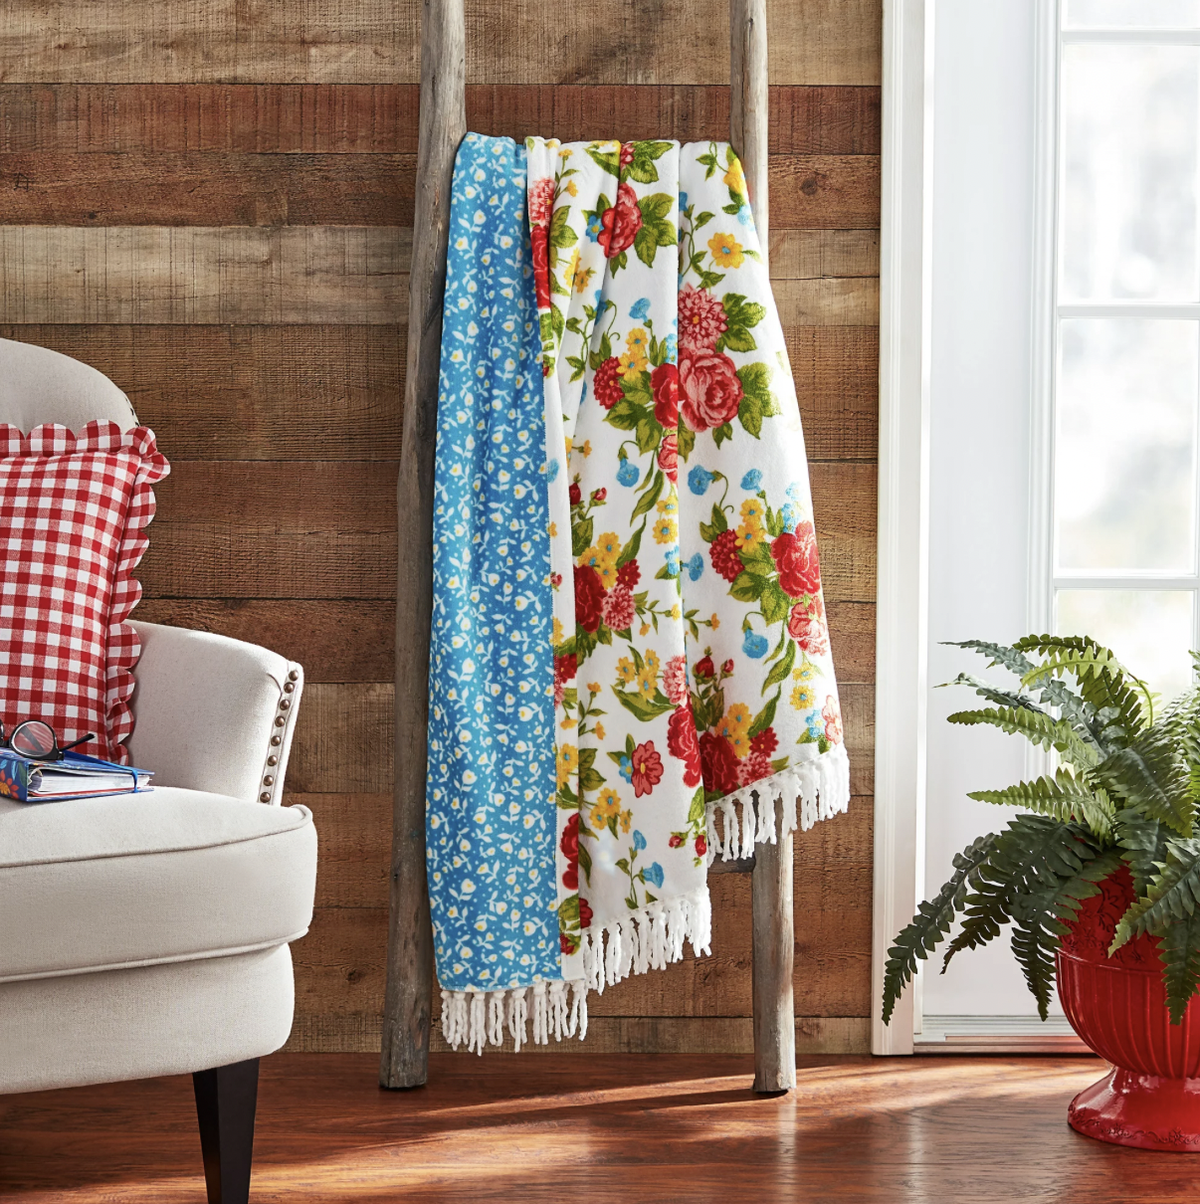 The Pioneer Woman Throw Blankets at Walmart - Where to Buy Ree Drummond's  Blankets